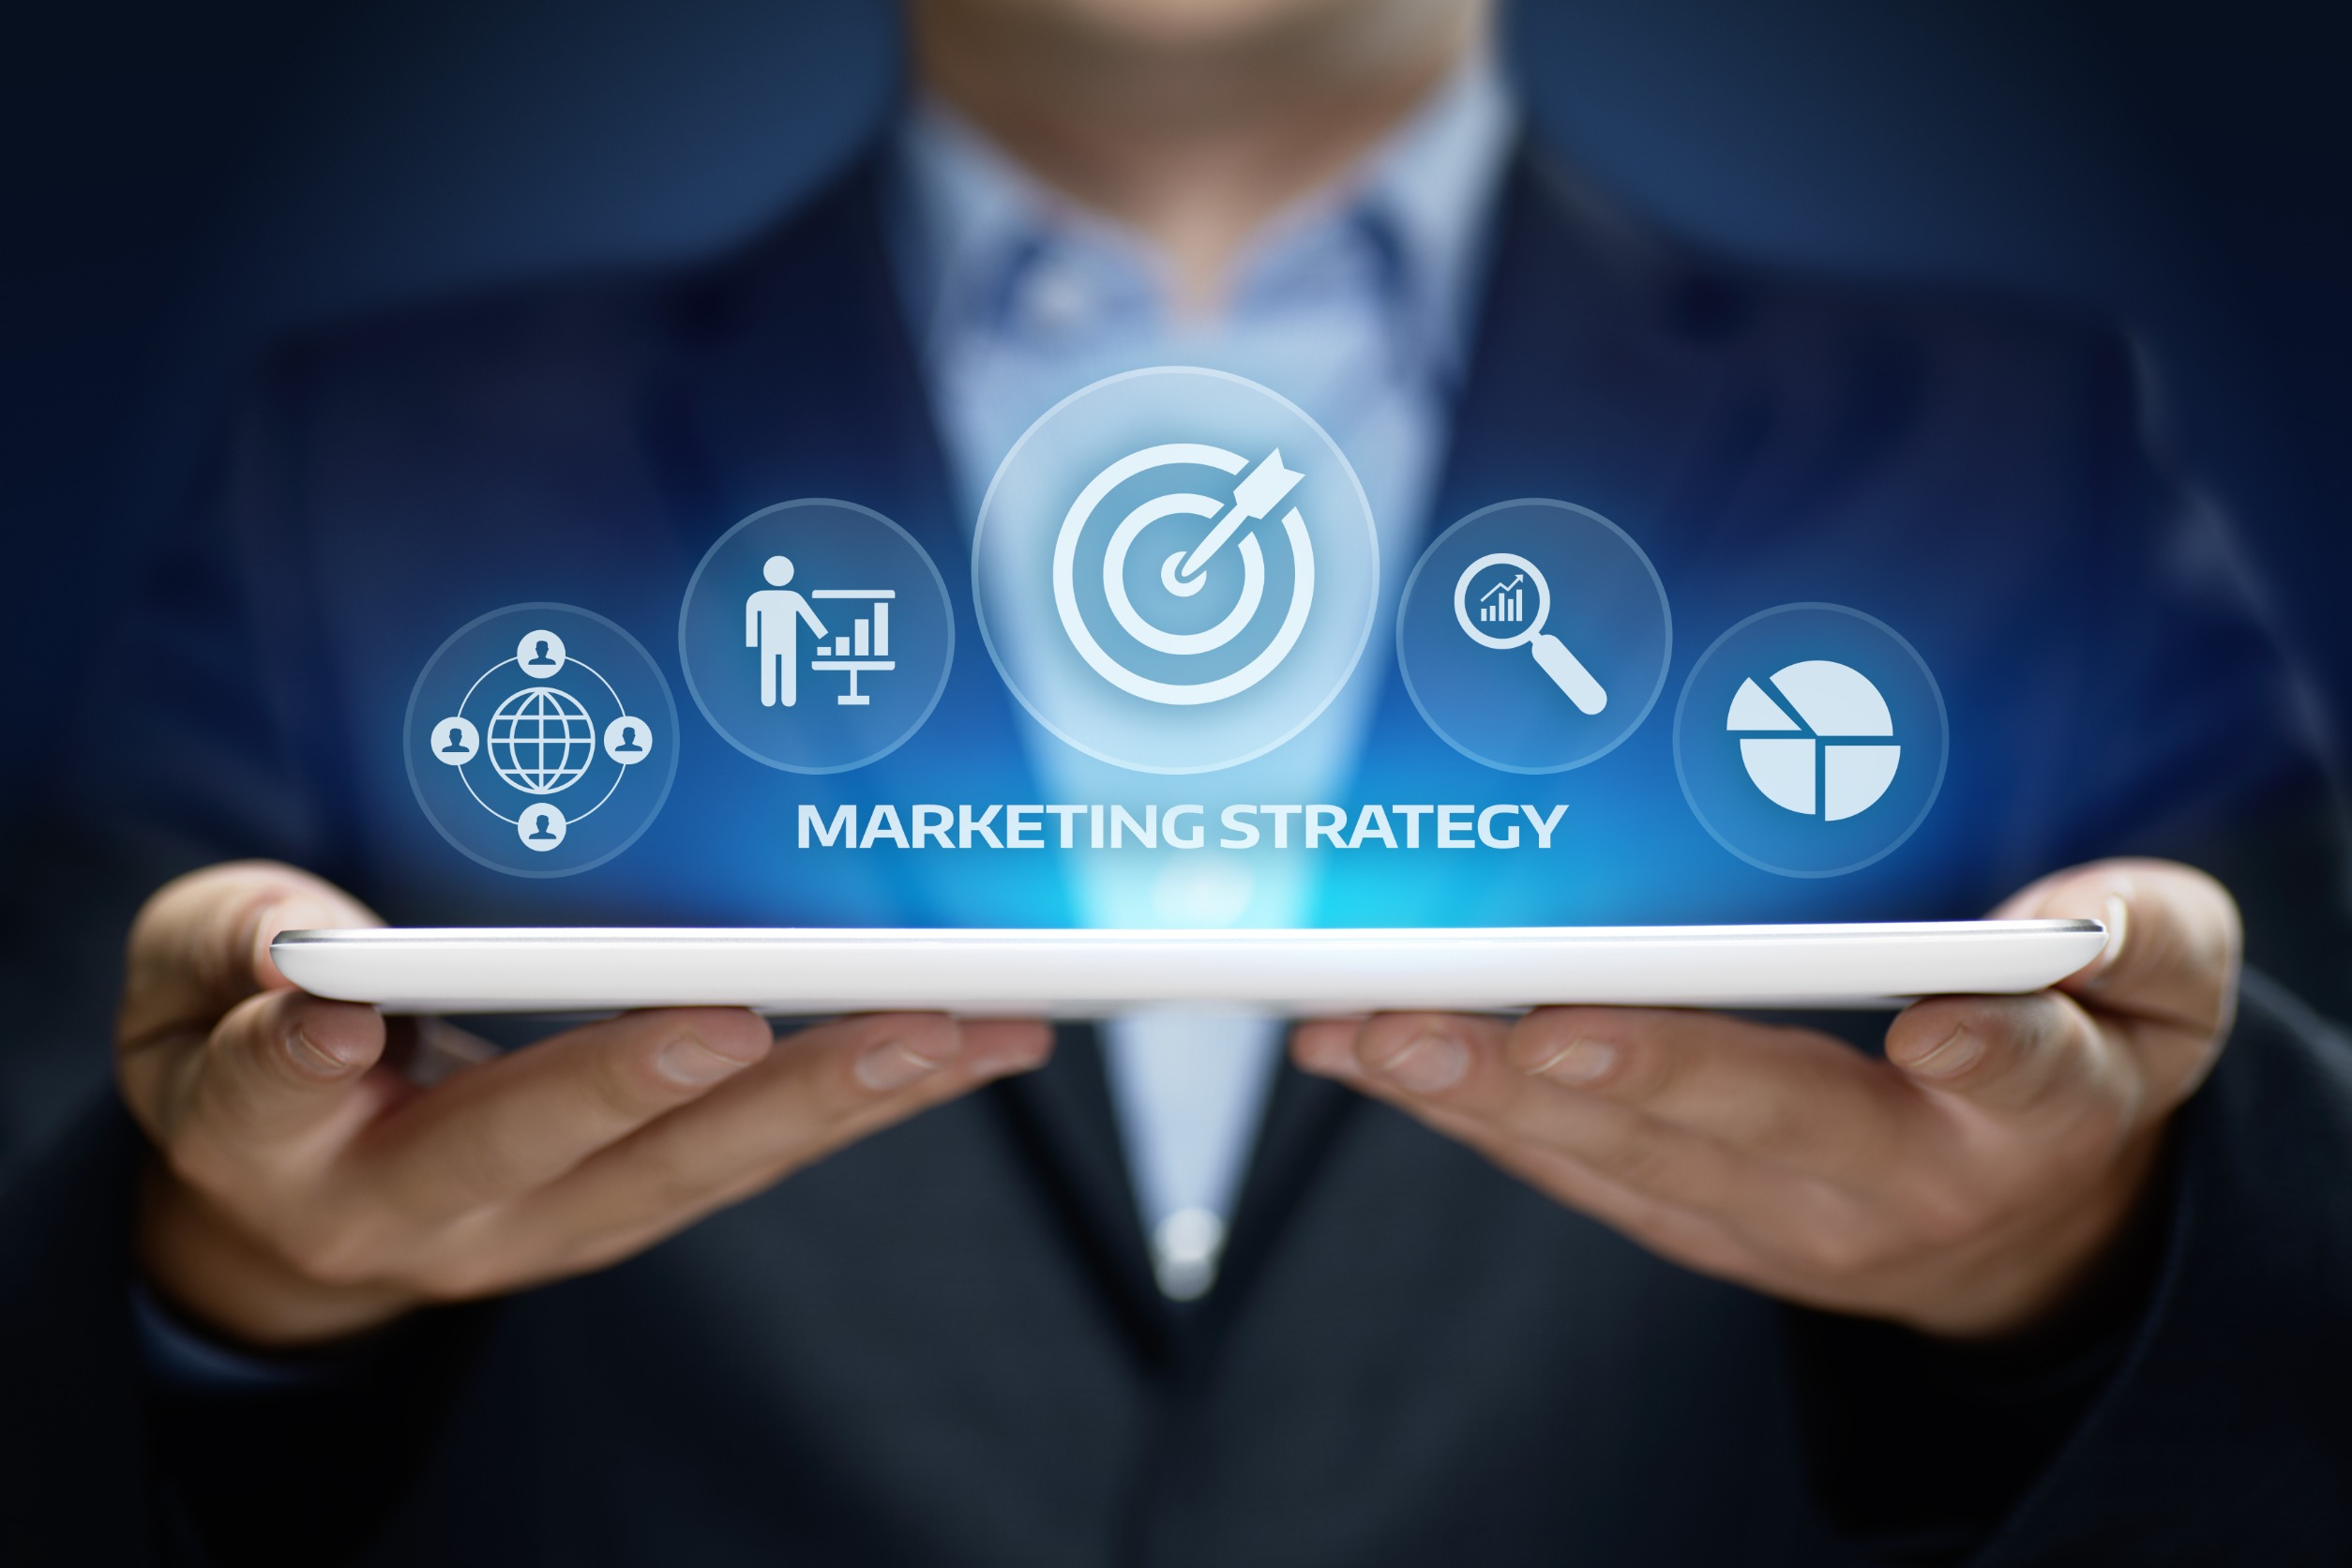 5 Effective Hotel Marketing Strategies to Boost Sales